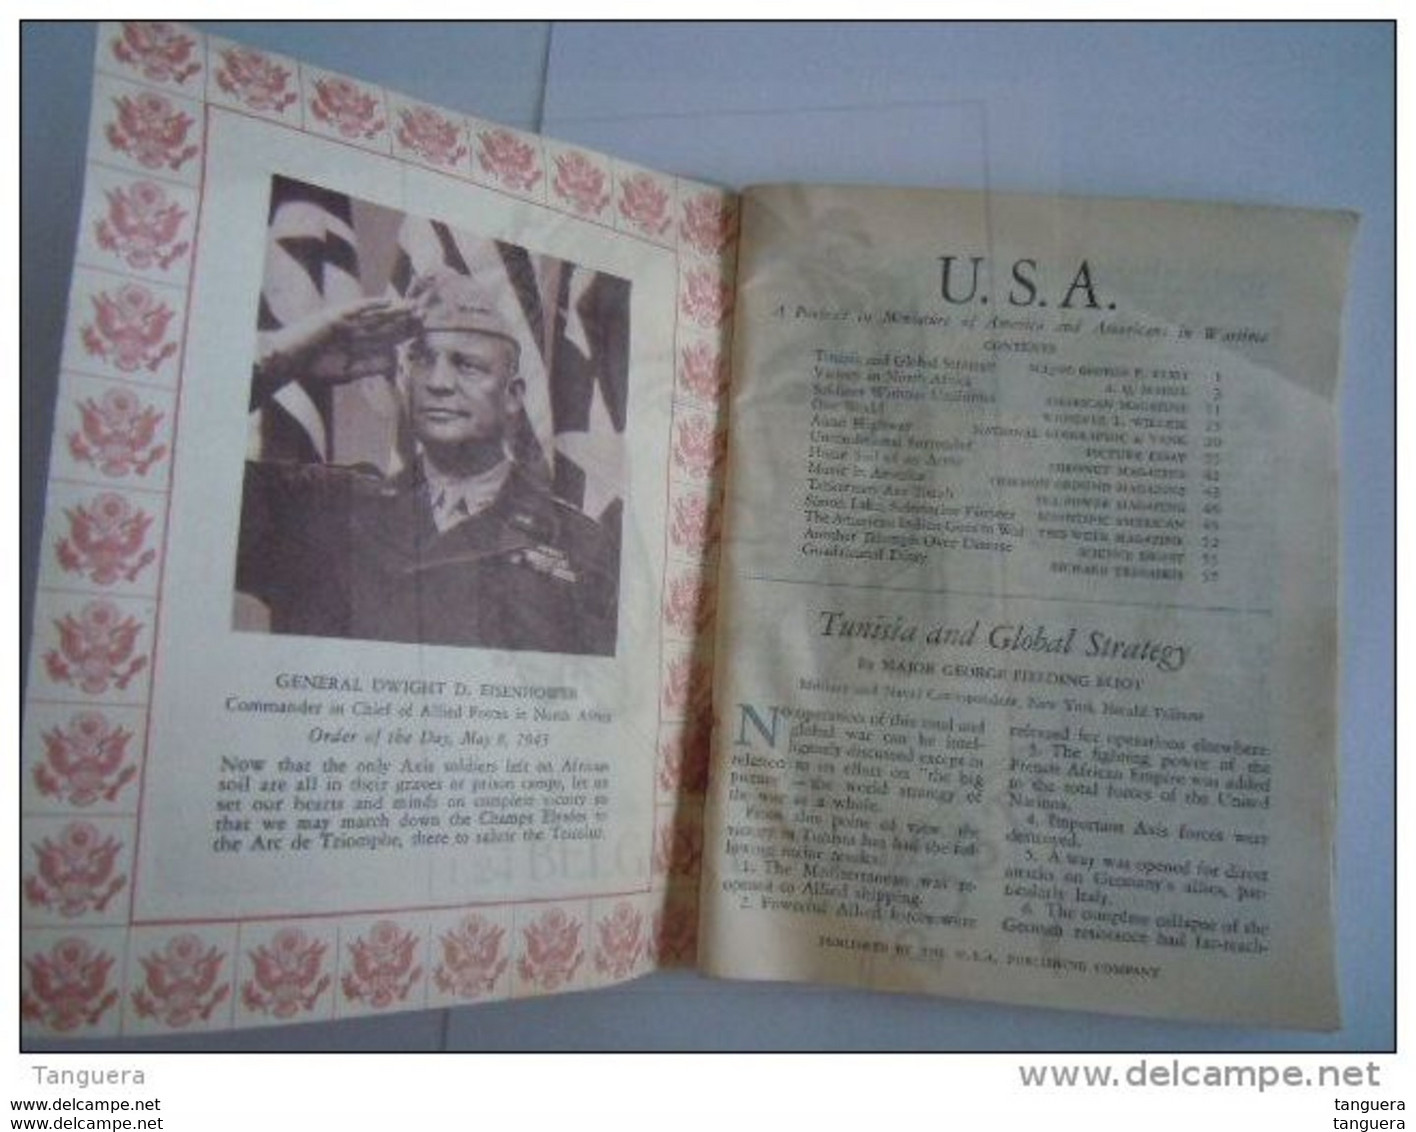 U.S.A USA  Vol. 1 N° 2 A portrait in miniature of America and americans in Wartime end 1943 small book